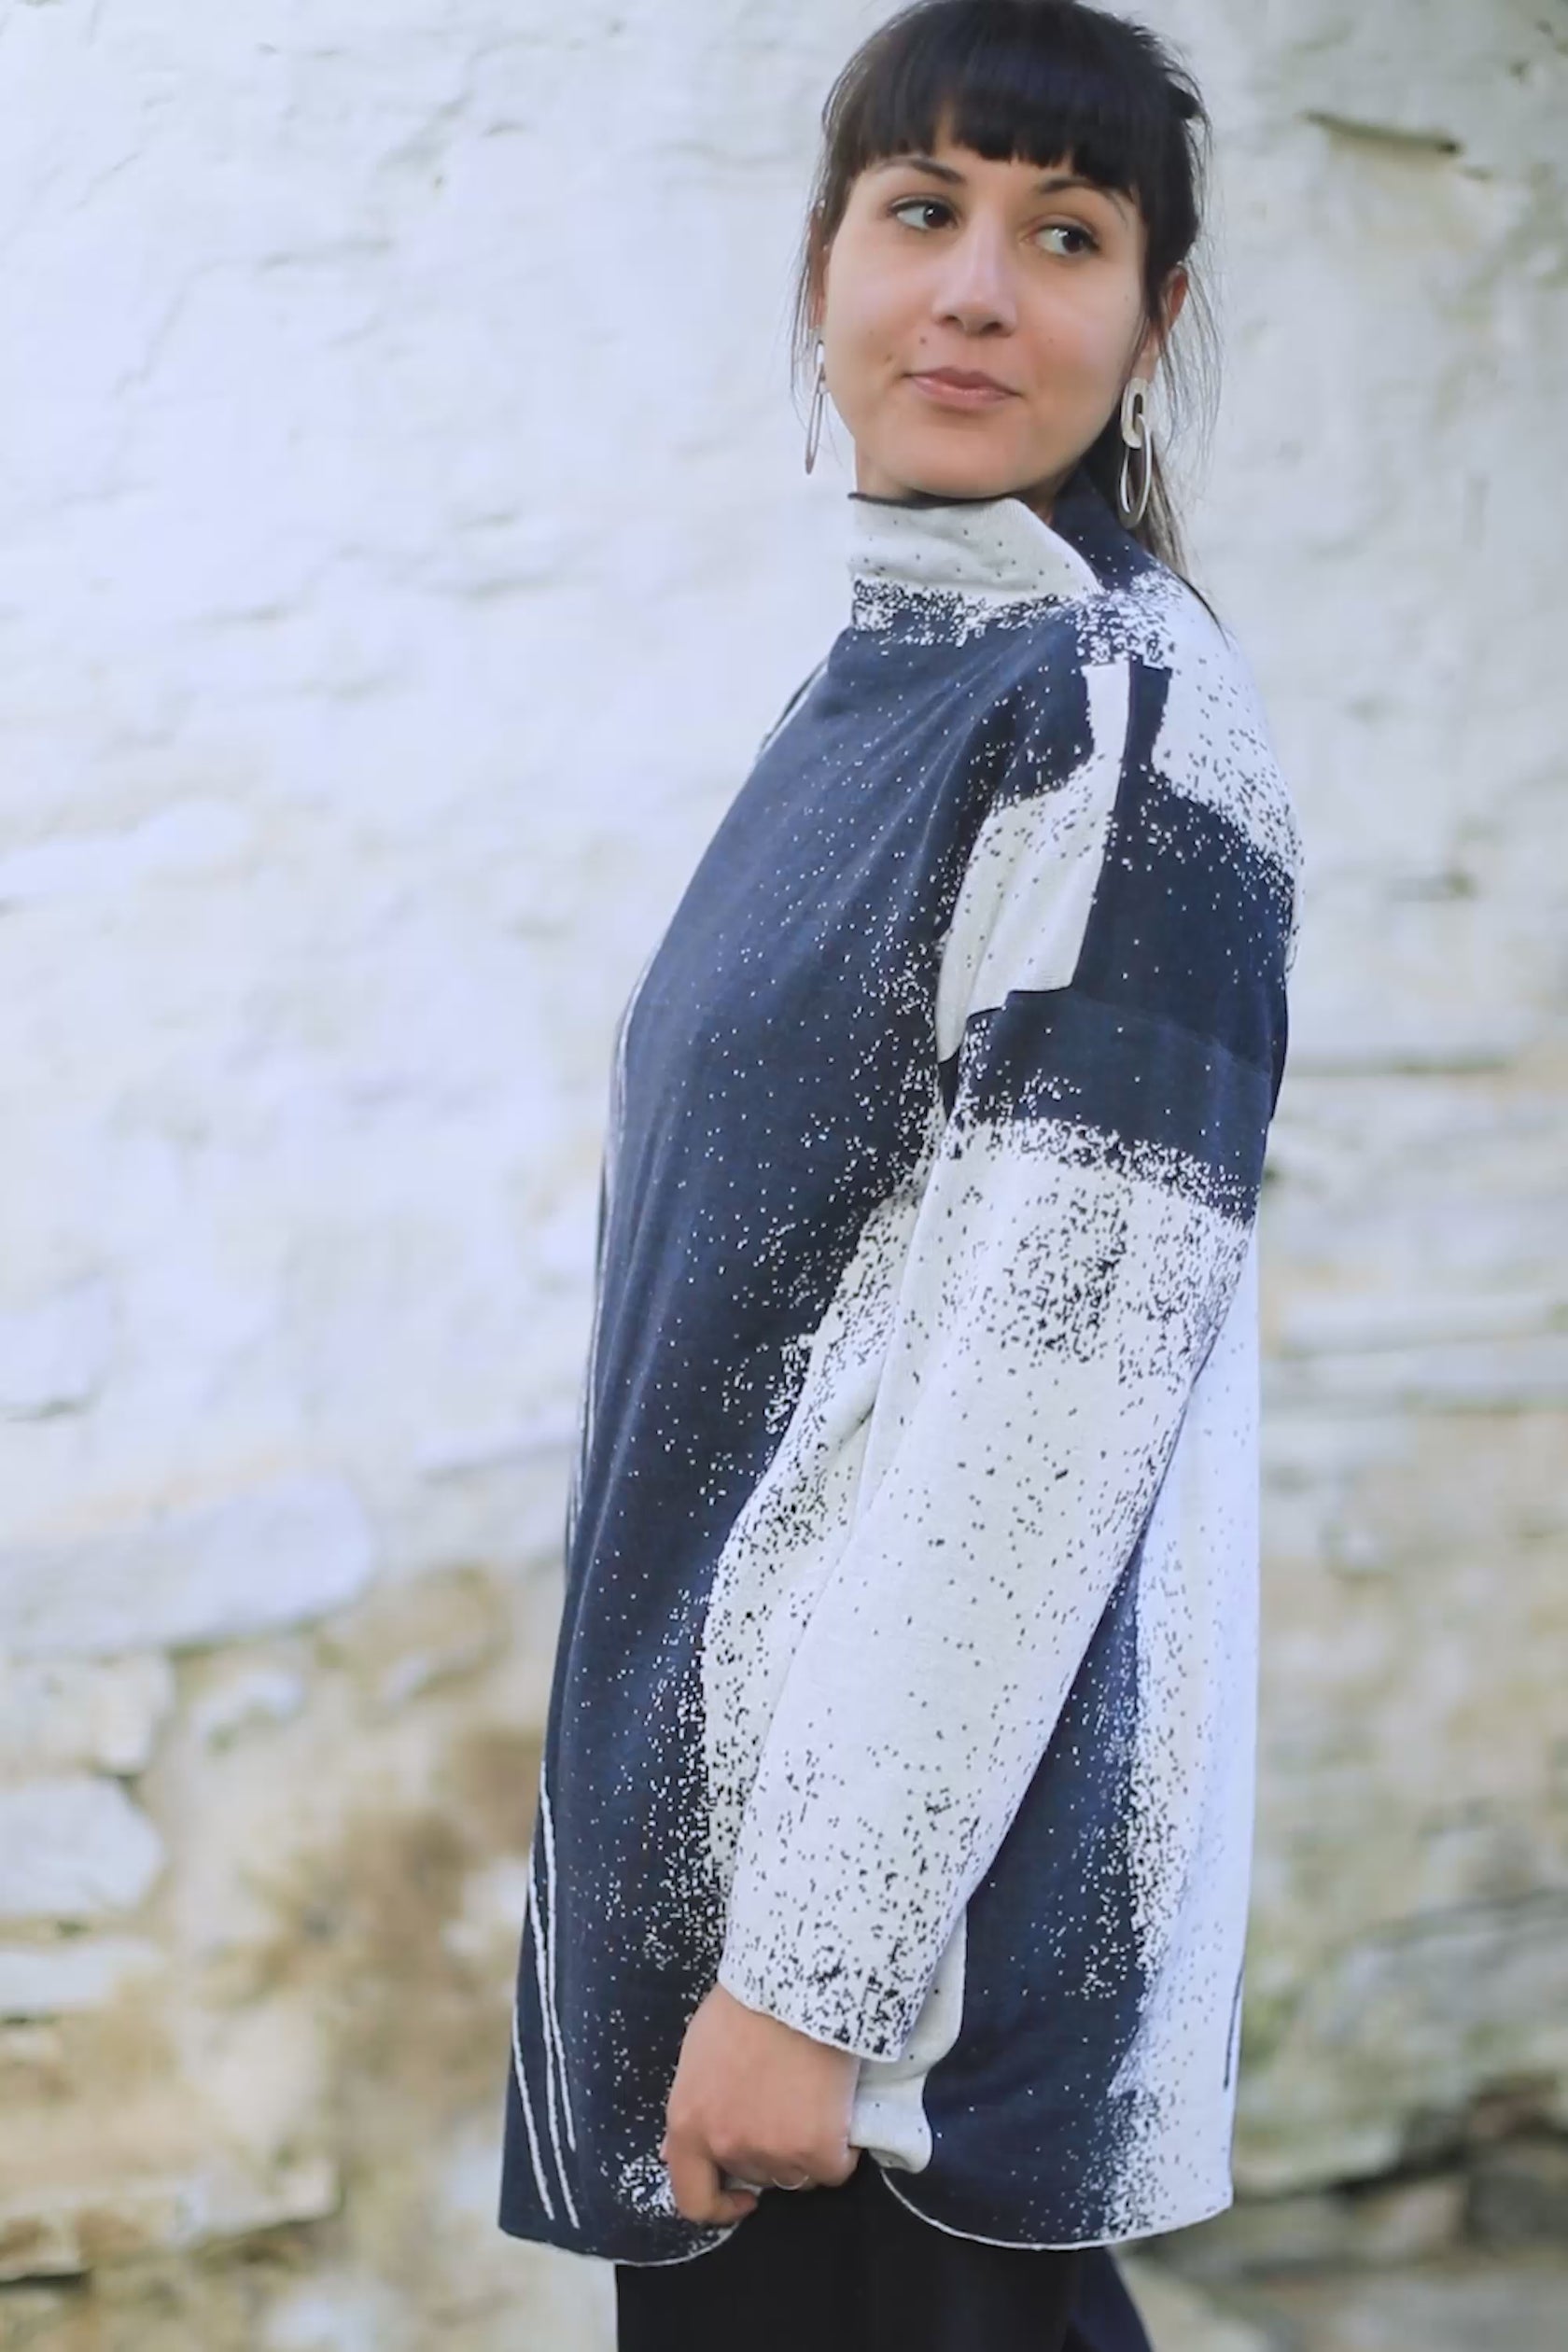 Video shot inside a small, rustic stone building in Hoswick, Shetland. A tall woman with olive skin and dark, straight brown hair (worn tied back in a high ponytail) wears a longline midnight blue and pale grey jumper with an abstracted motif evocative of the sea shore. Lines much like rivulets made by water, sand speckles.